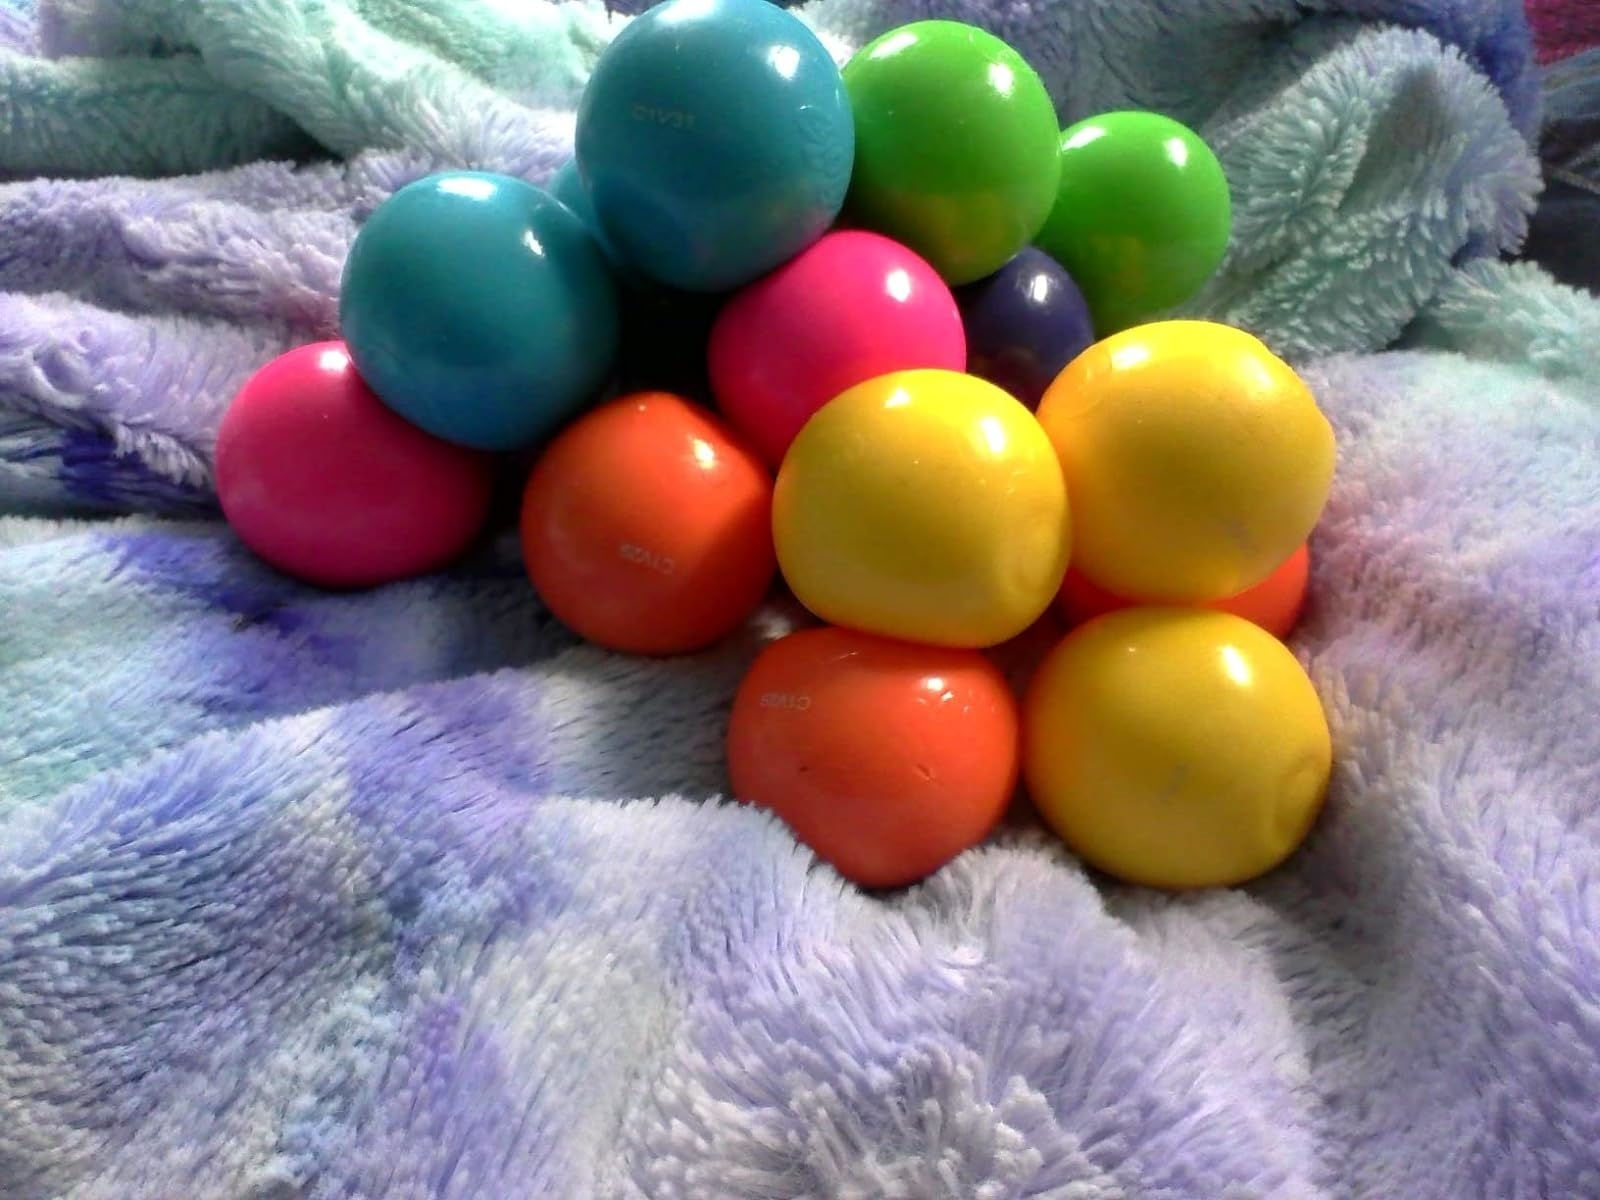 Brightly colored plastic balls on a textured blanket